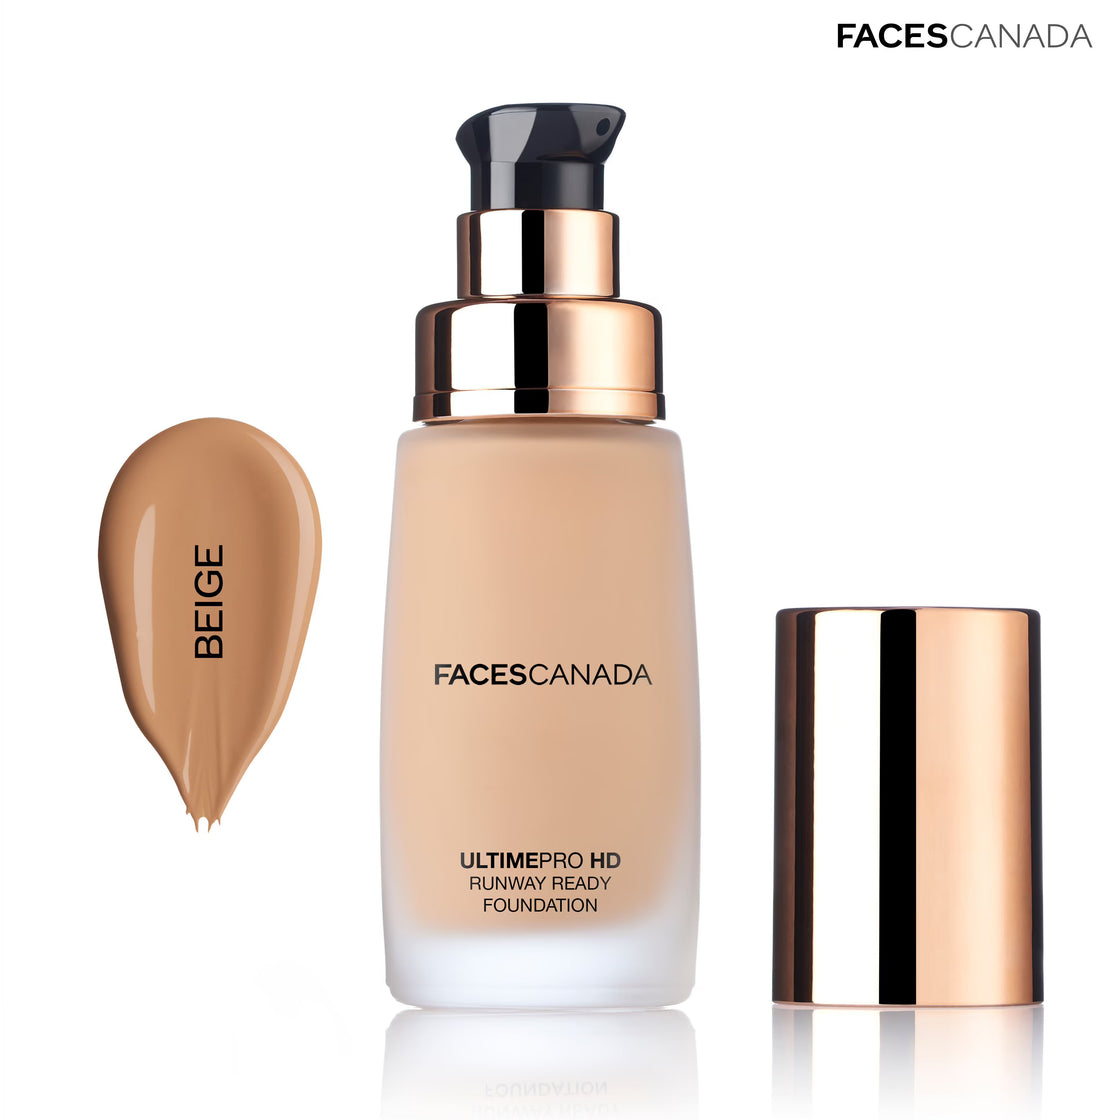 Faces Canada Ultime Pro Hd Runway Ready Foundation -30Ml-8